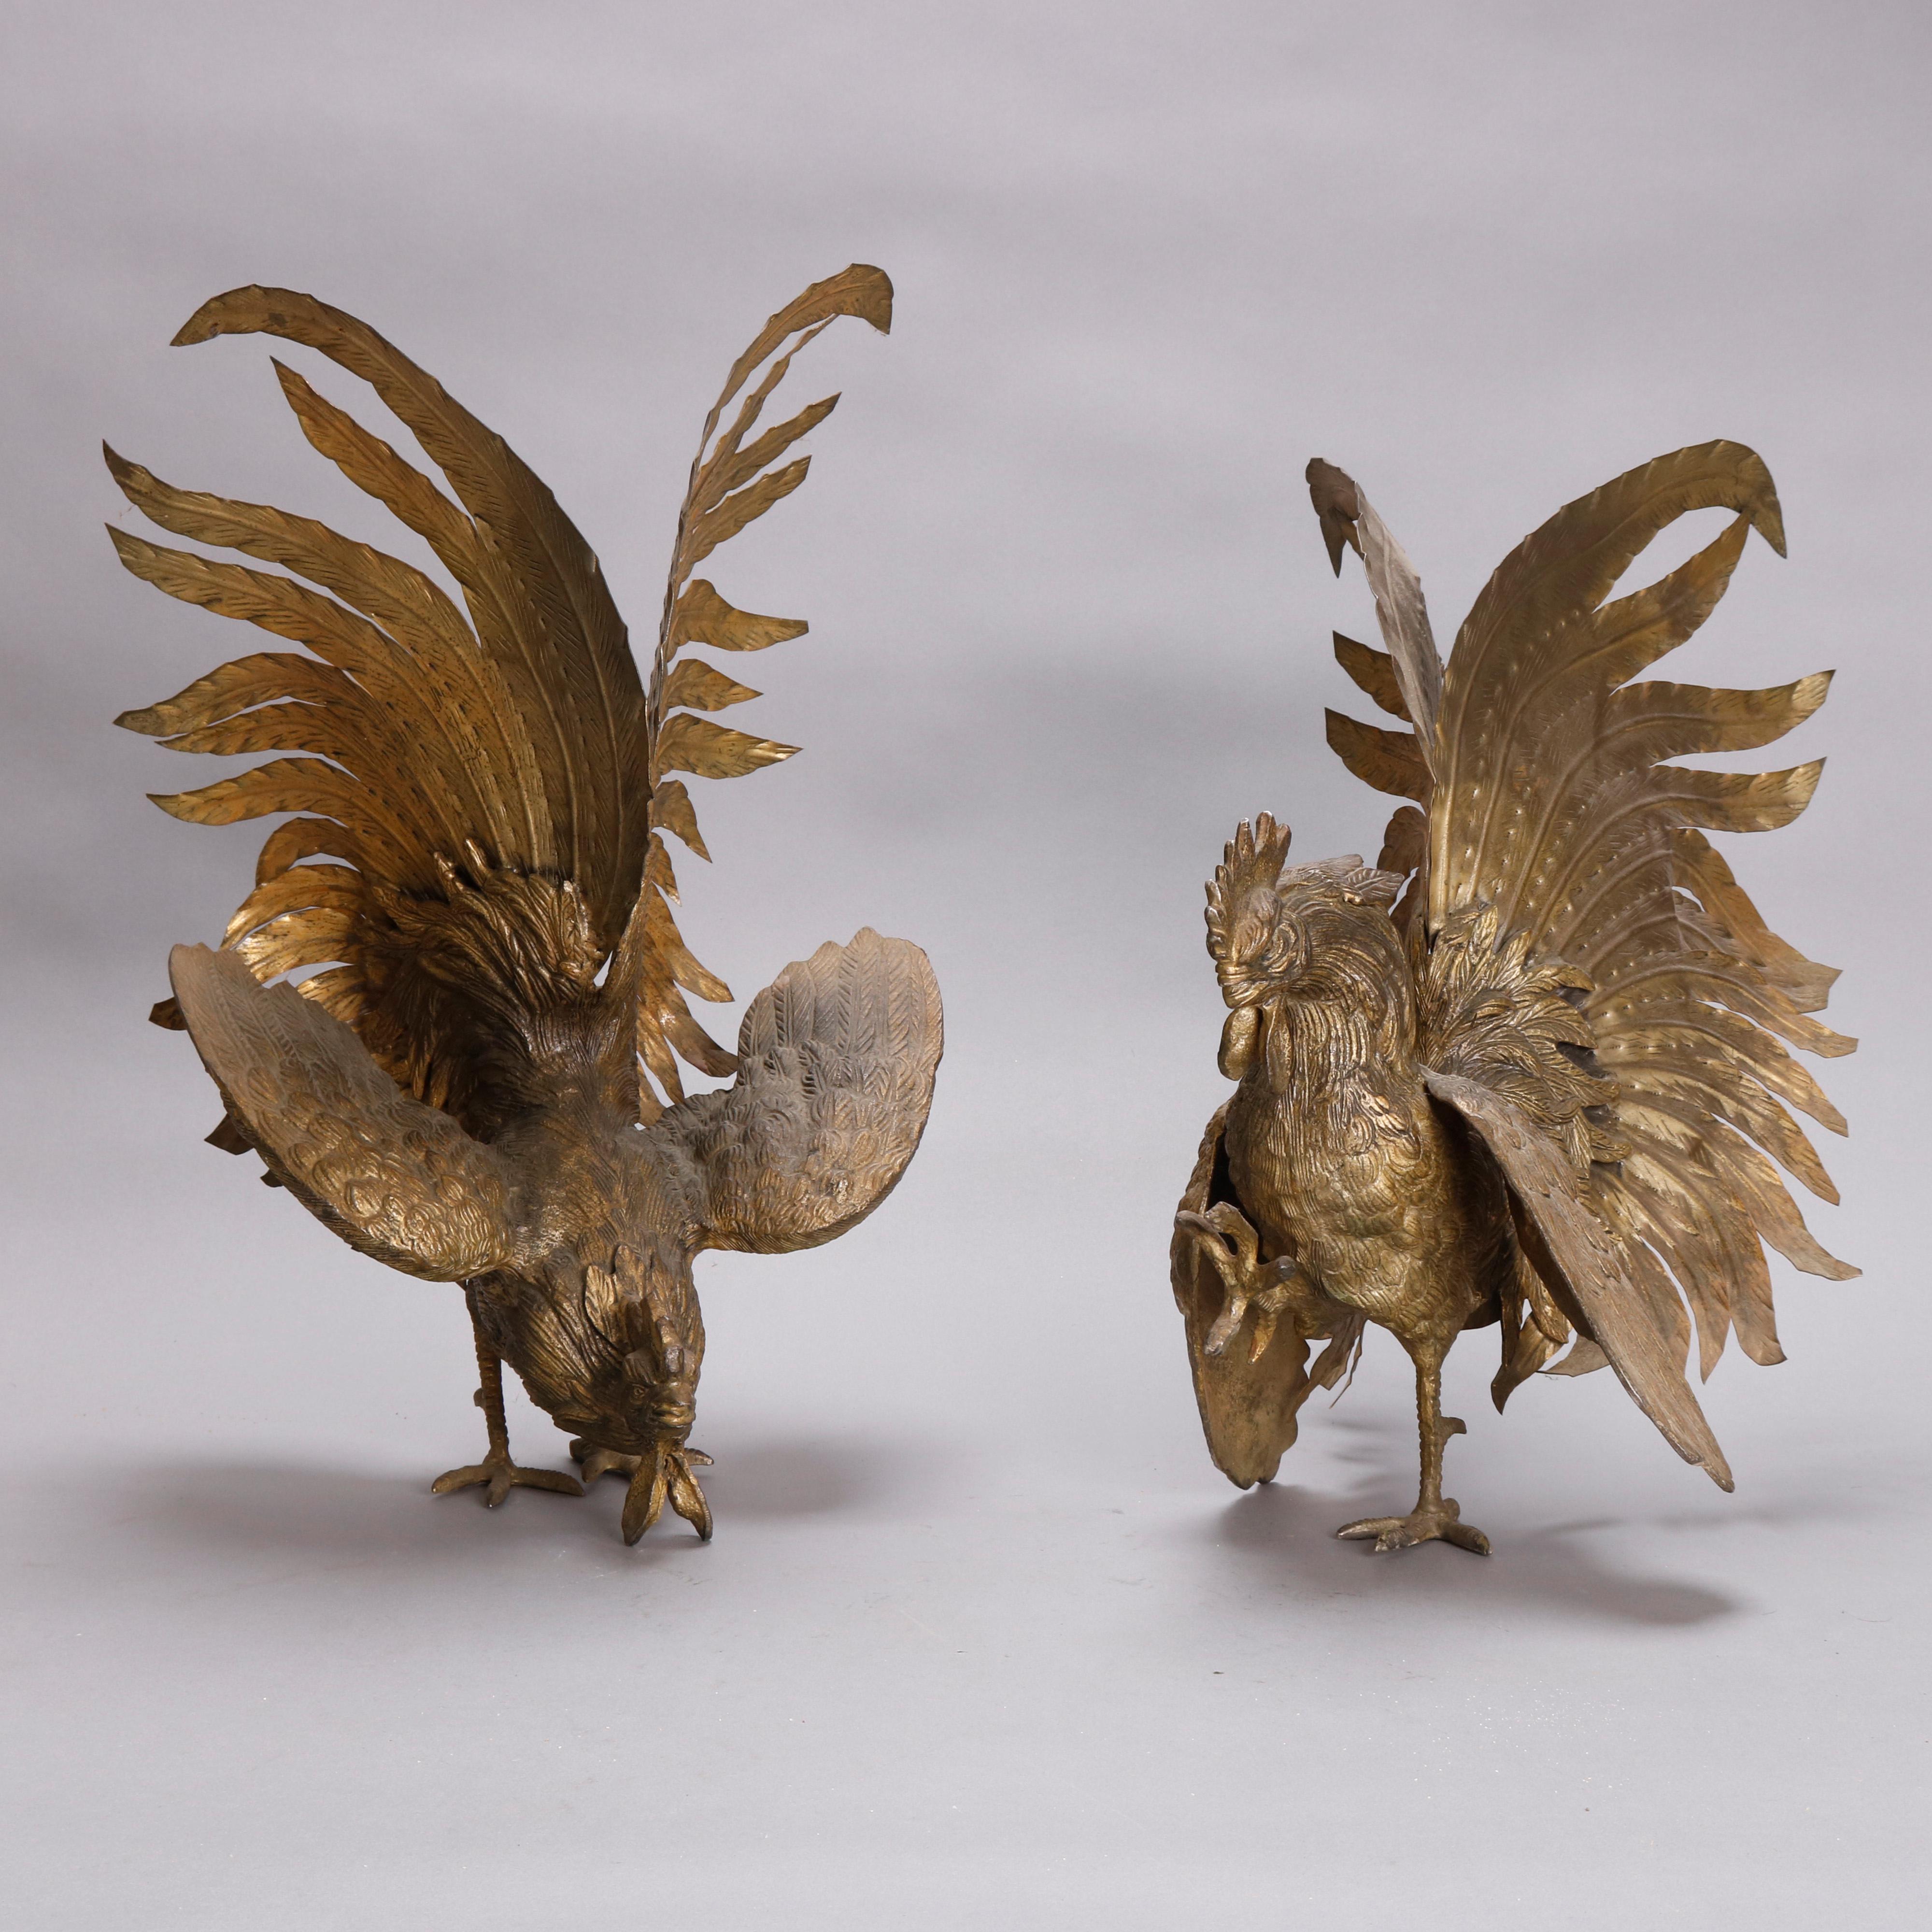 20th Century Vintage French Bronzed Metal Sculptures of Cock Fighting Roosters, circa 1930